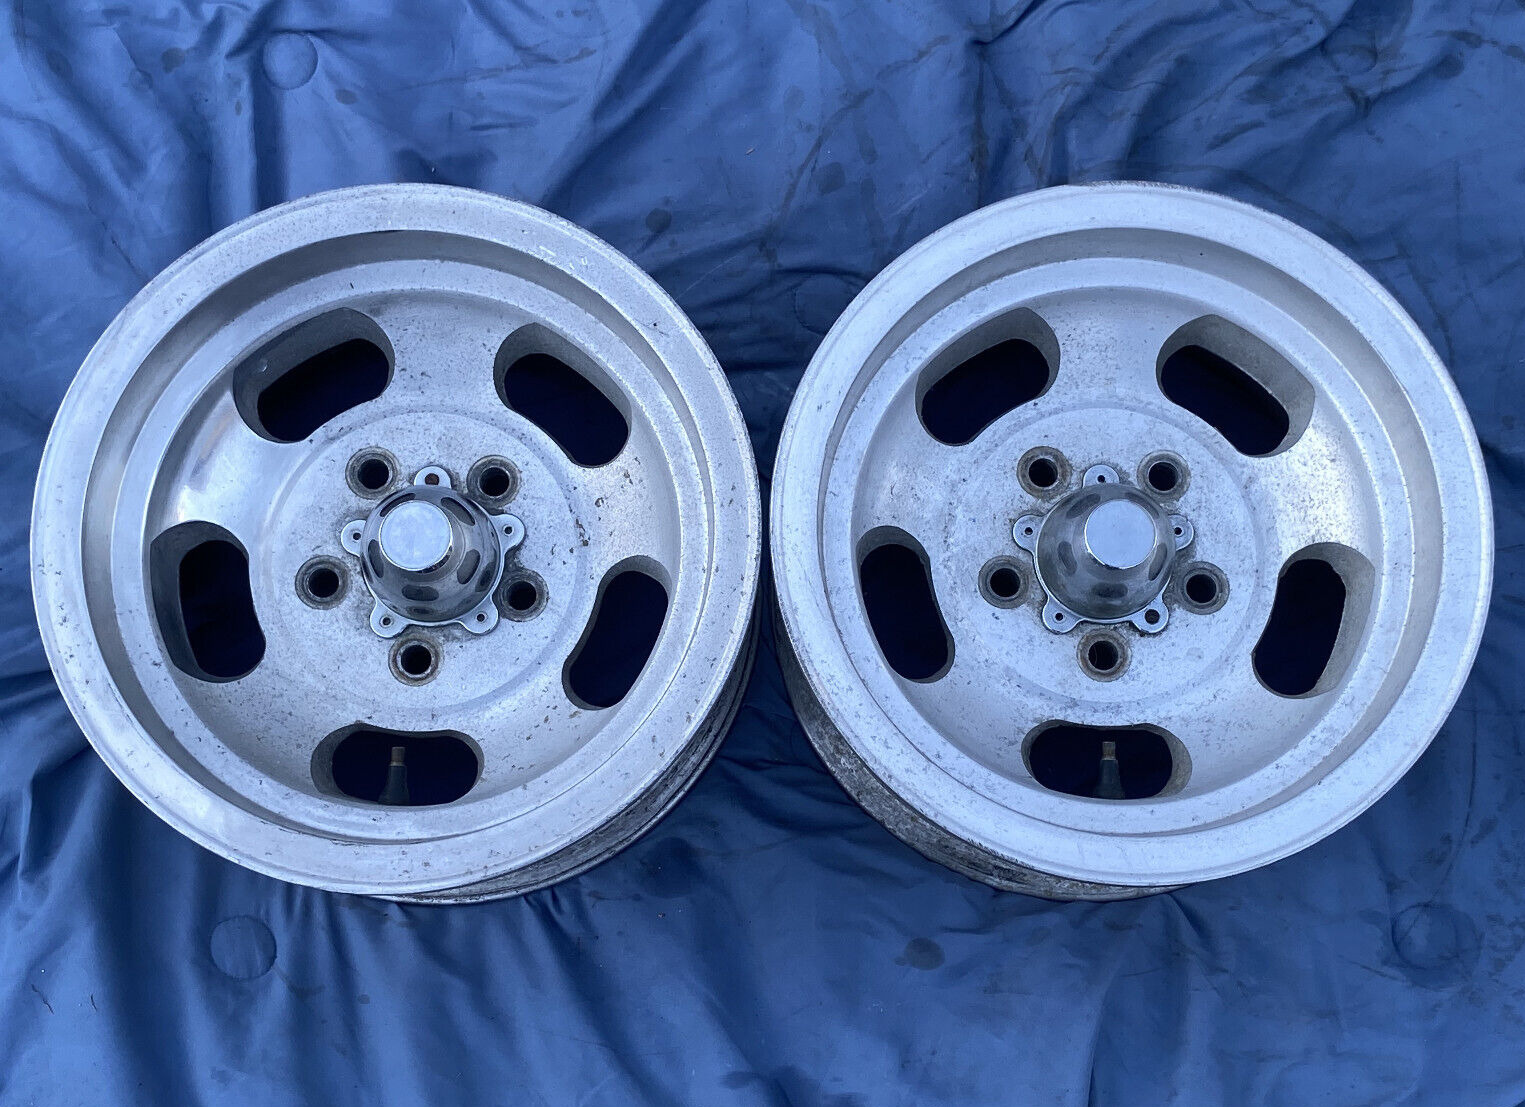 PAIR OF (2) 14x7” US INDY MAG WHEELS RIMS 5x4.75 CHEVY PONTIAC OLDS BUICK